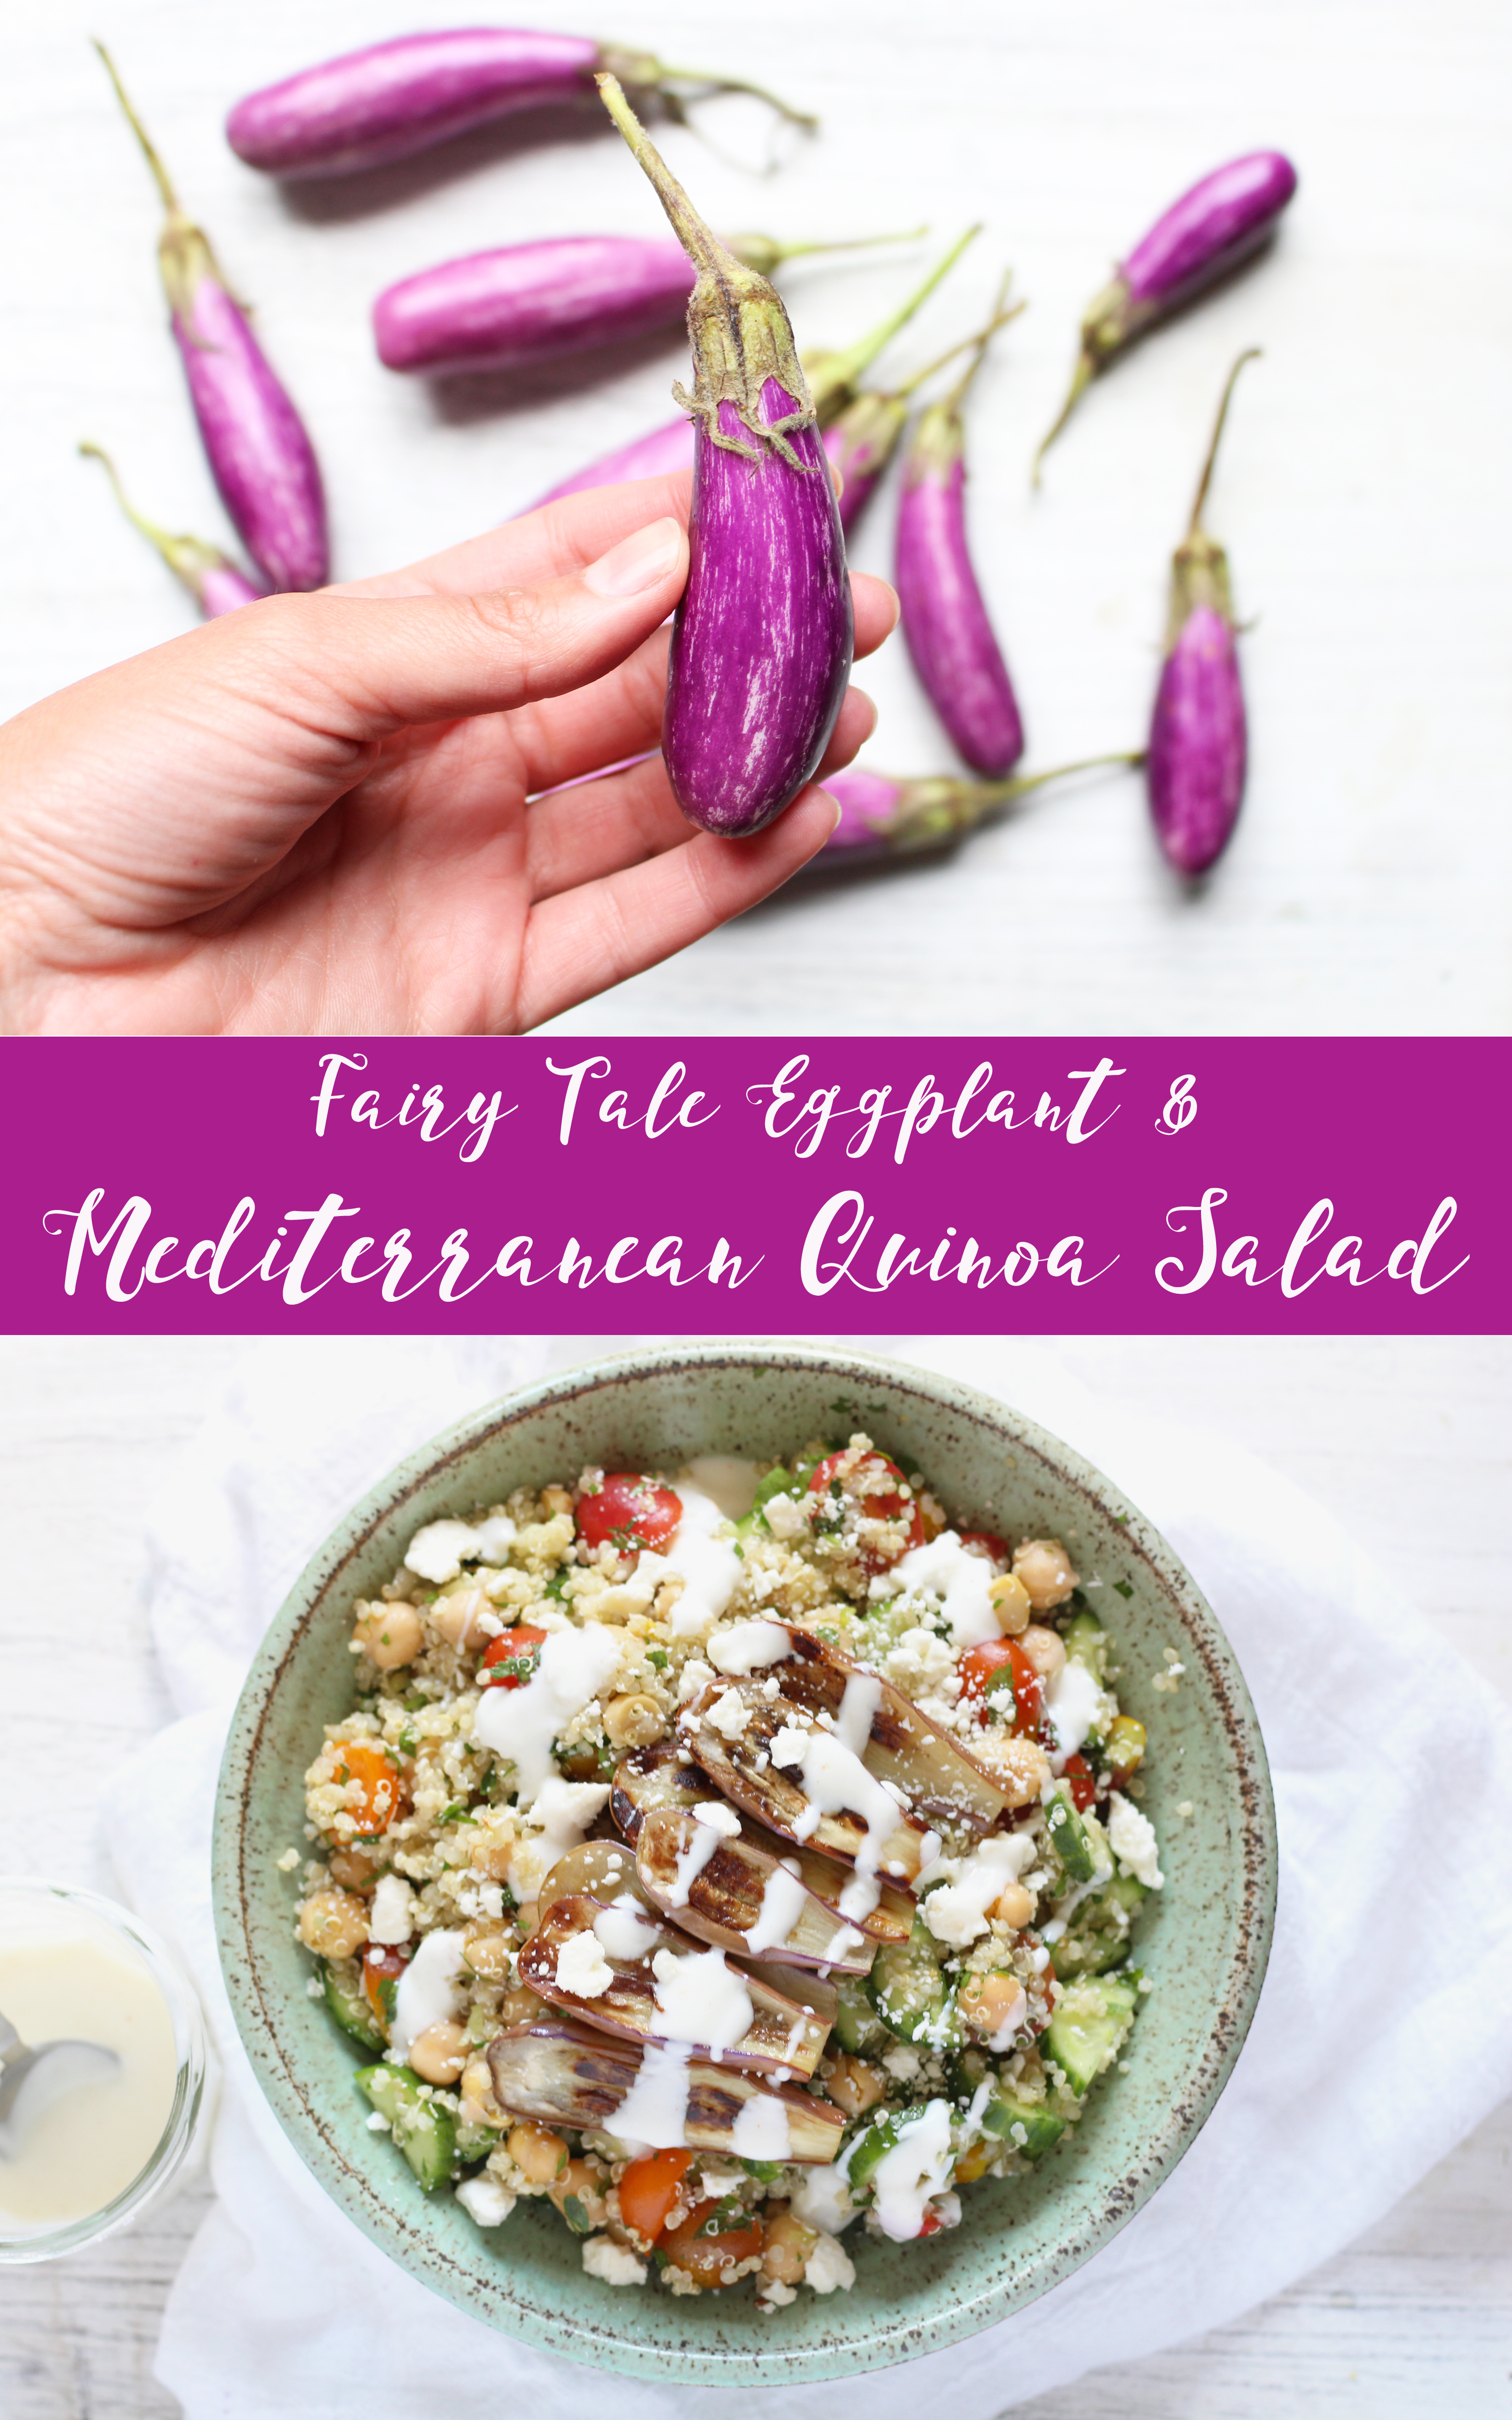 Fairy Tale Eggplant over a Mediterranean Quinoa Salad with Spiced Yogurt Dressing. An easy and fresh summer meal!